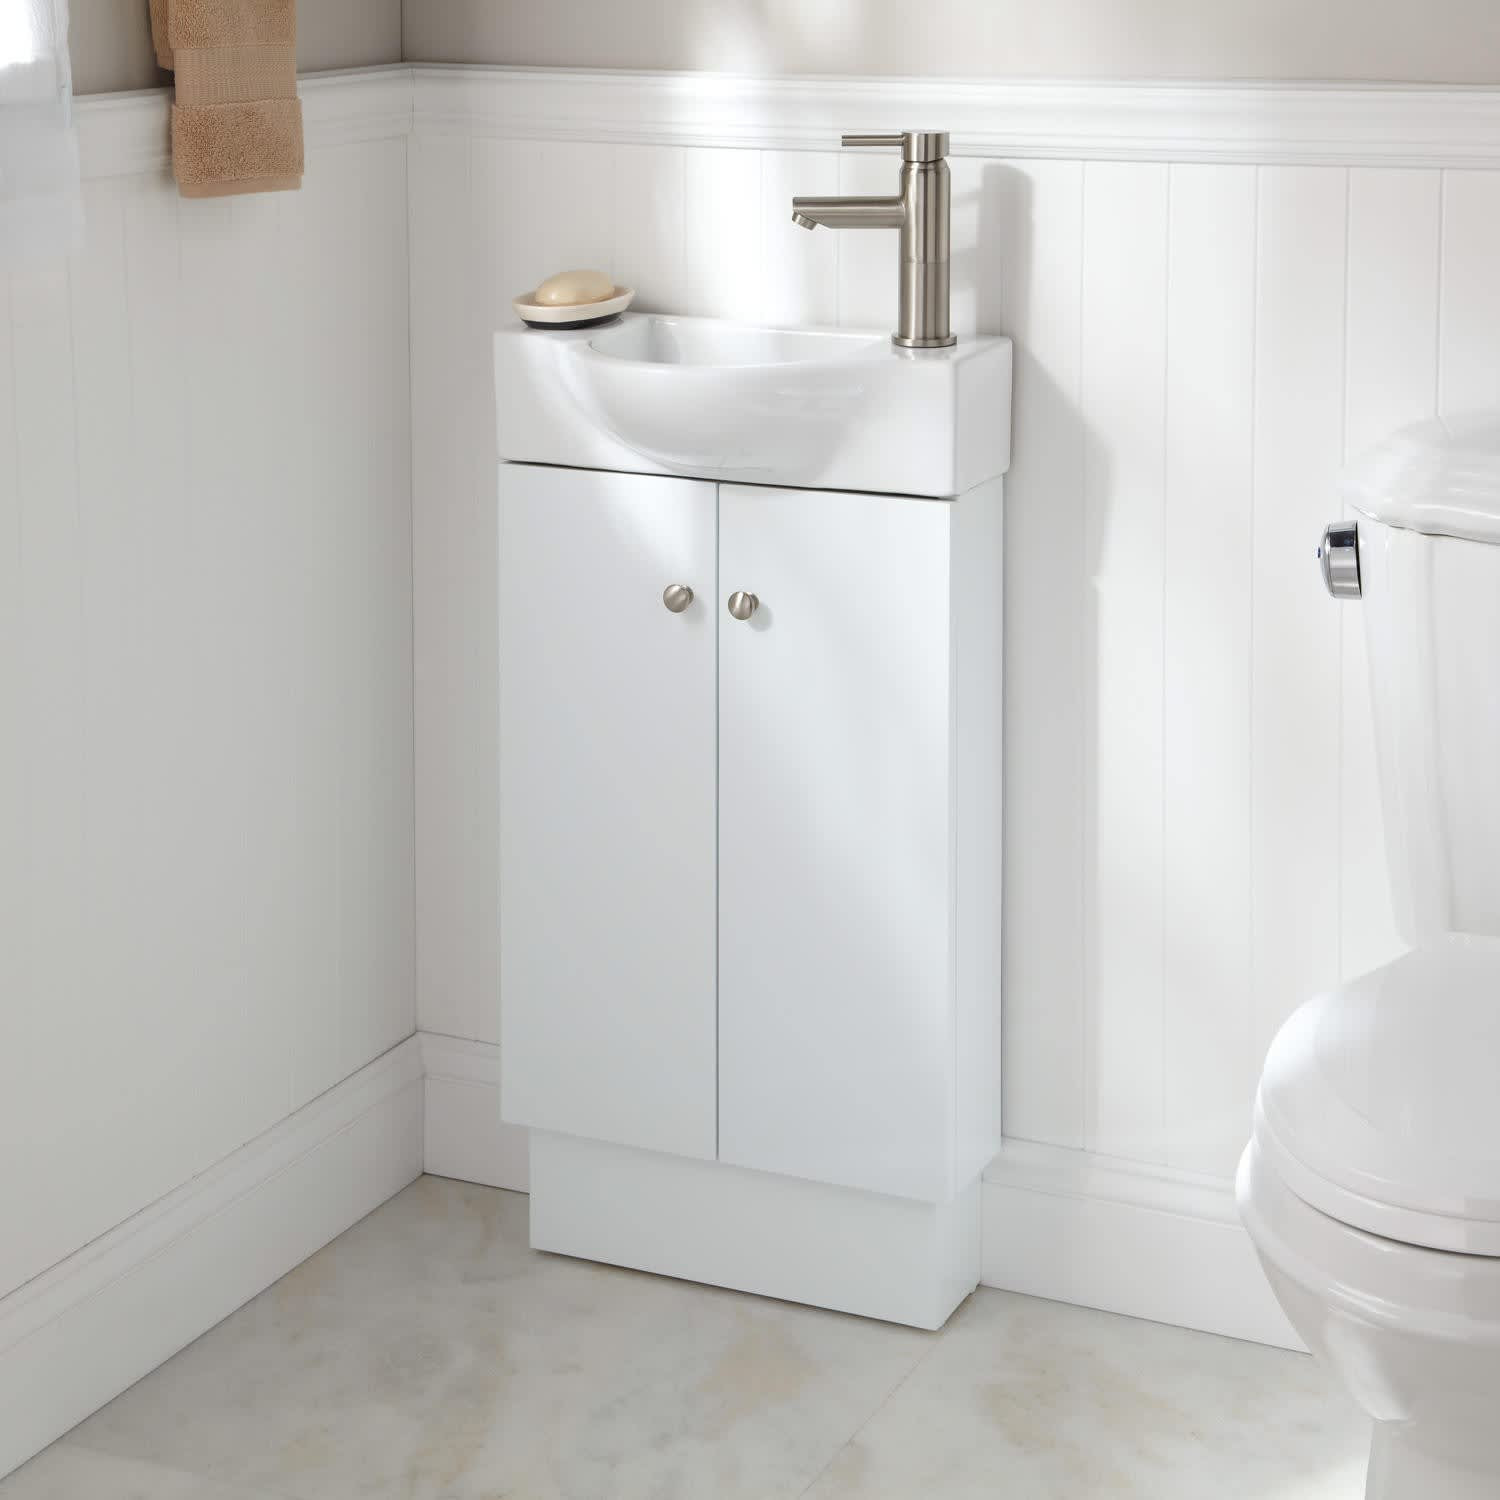 Double Vanity For Small Bathroom
 Small Bathroom Vanities and Sinks for Tiny Spaces